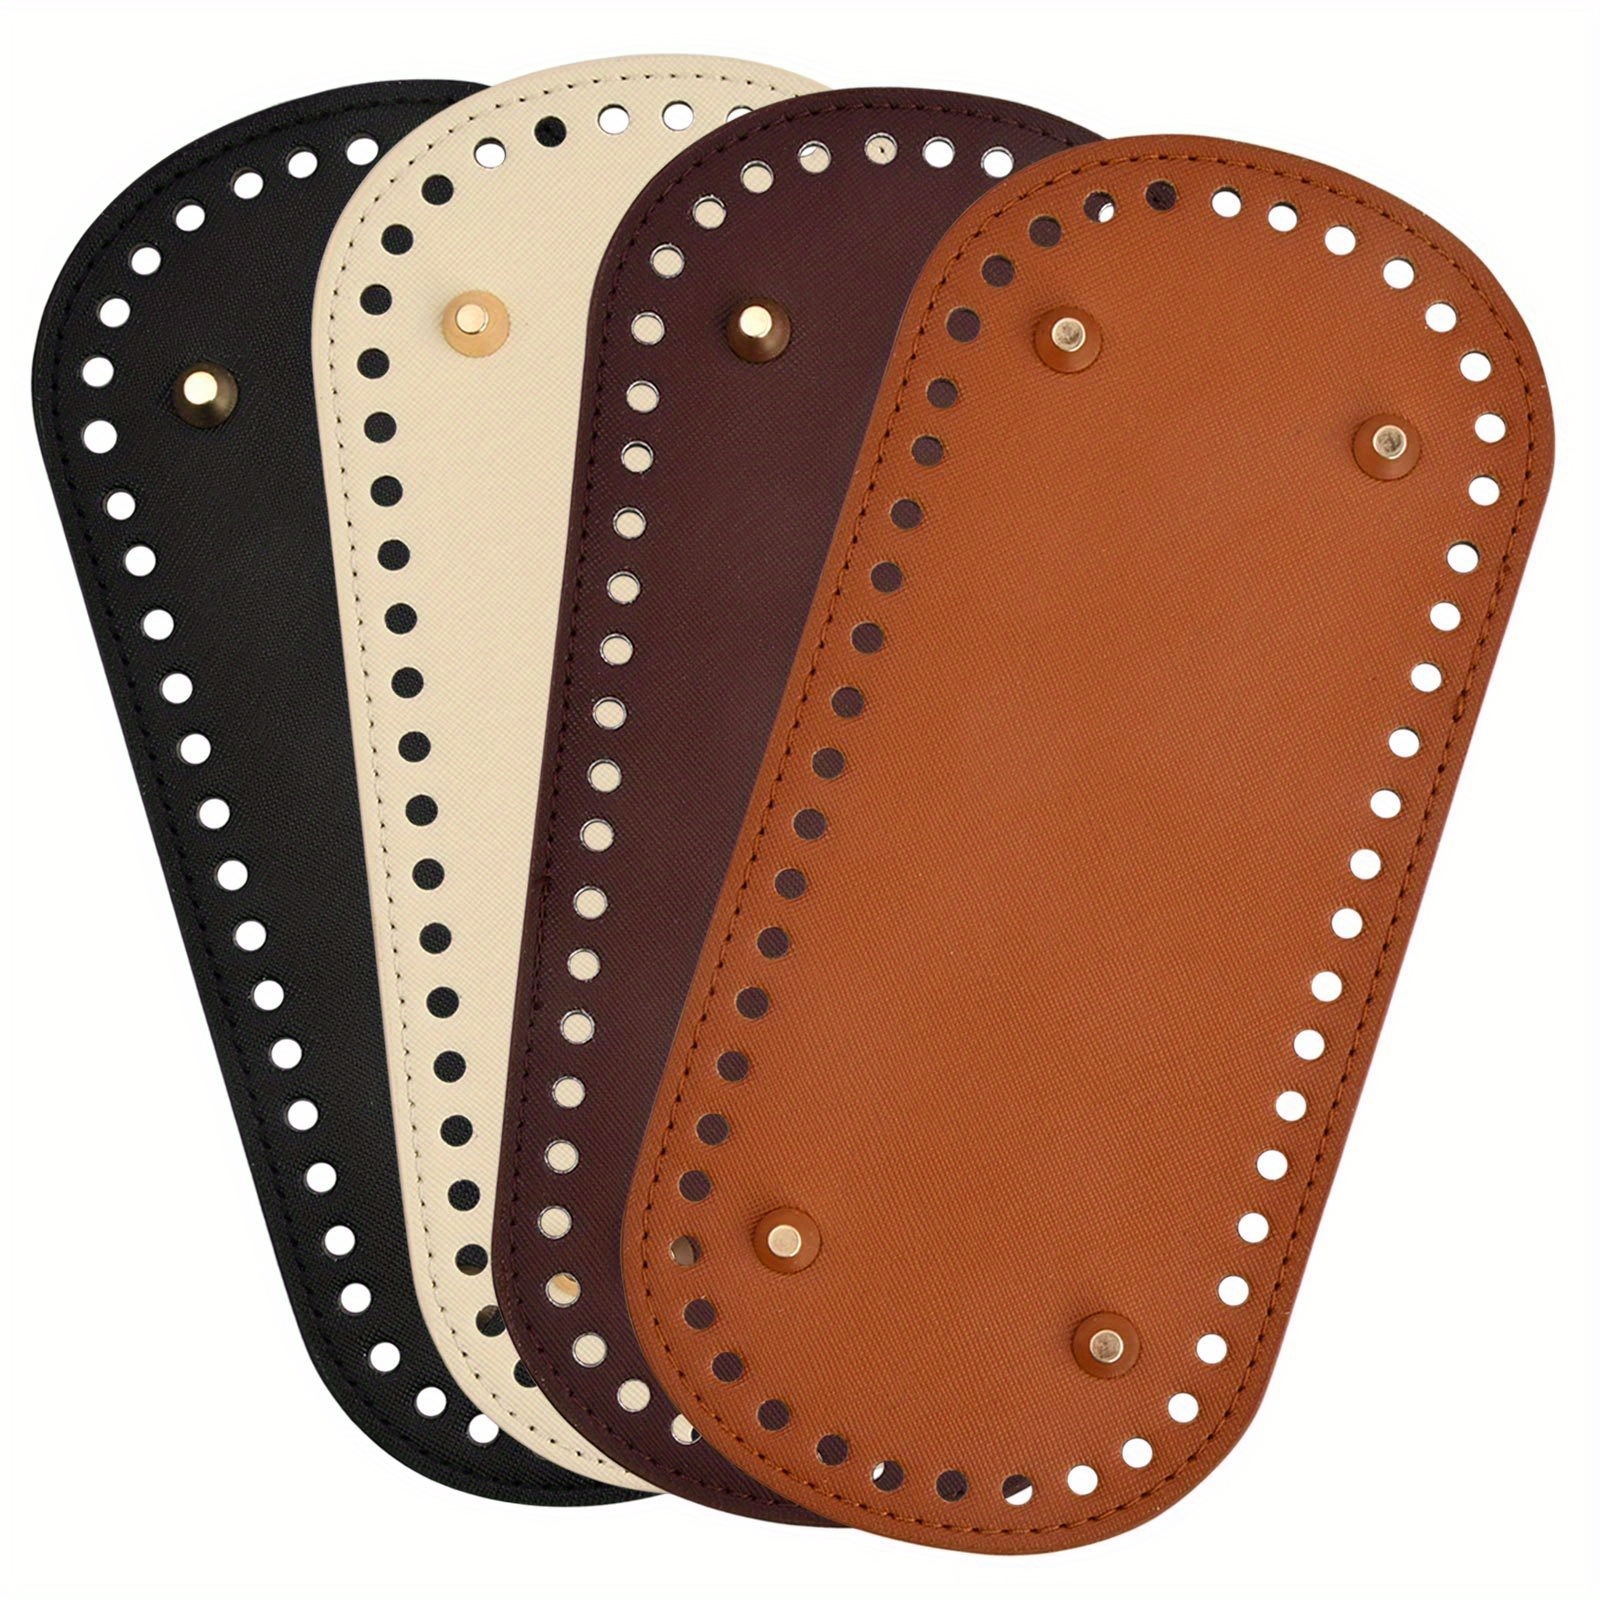 

4-pack Oval Pu Leather Bag Bottom Inserts - Artificial Leather Pads With Pre-punched Stitch Holes For Handbag & Purse Base Reinforcement For Crochet Projects